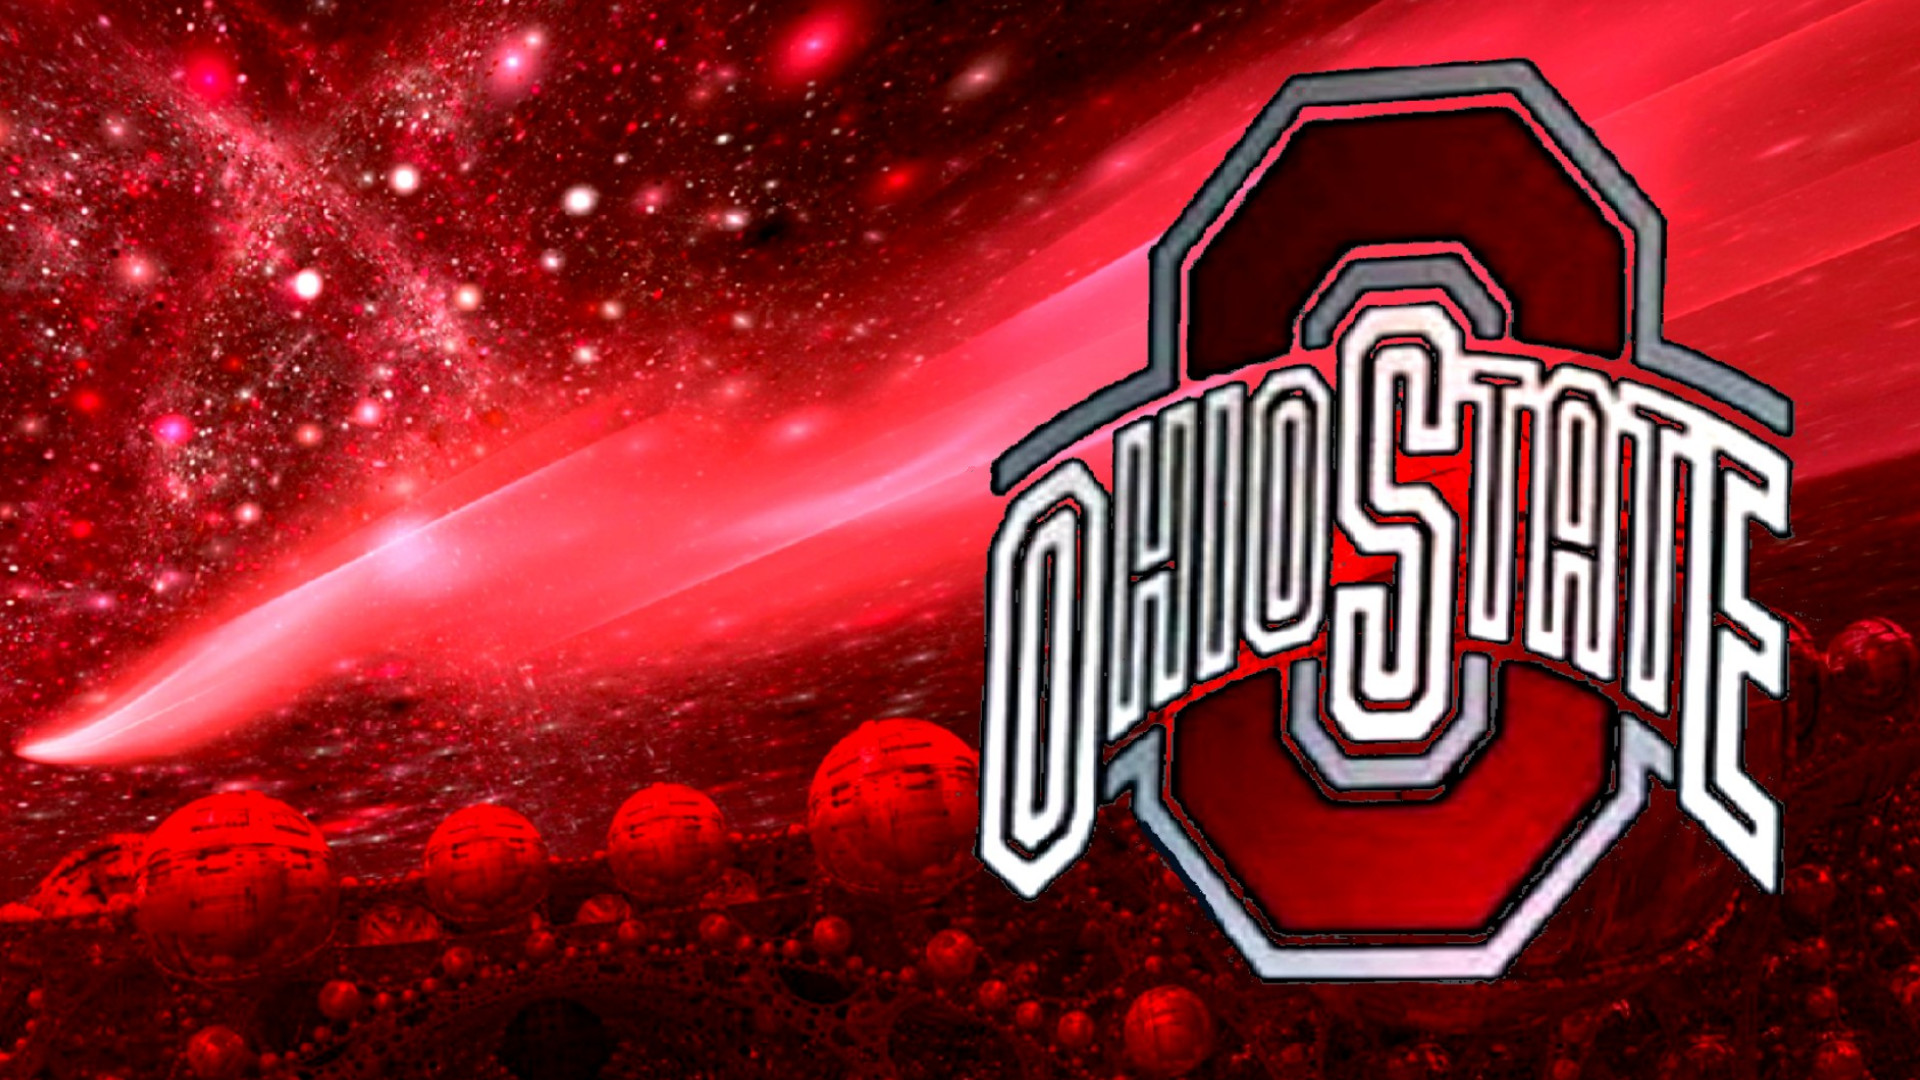 Ohio State iPhone Wallpaper (73+ images)